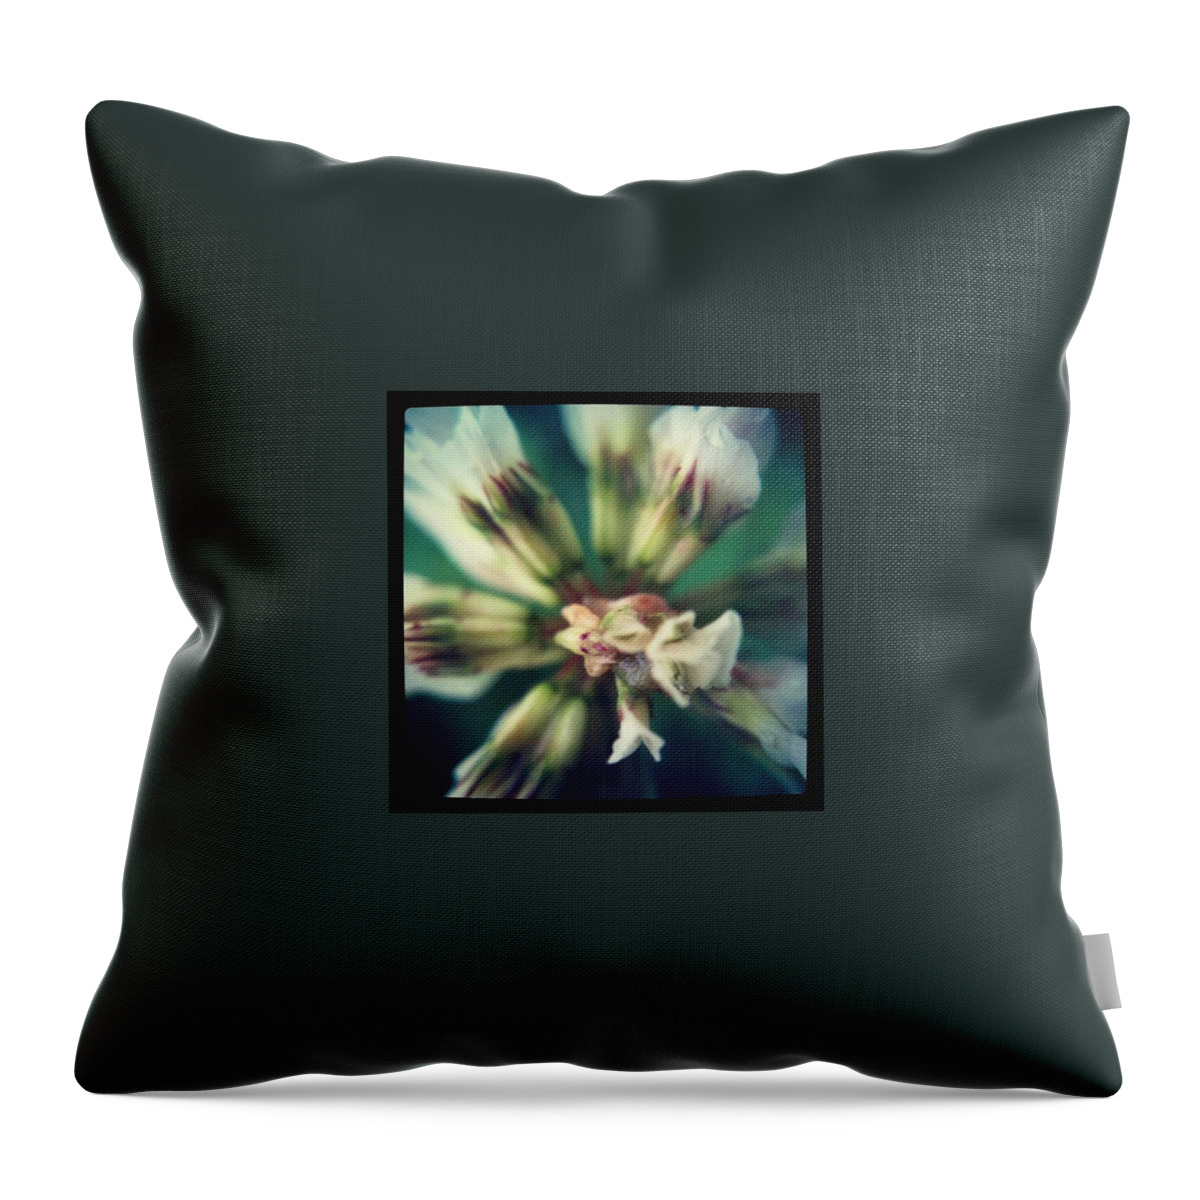 Clover Throw Pillow featuring the photograph Clover Flower Close Up by Vicki Field